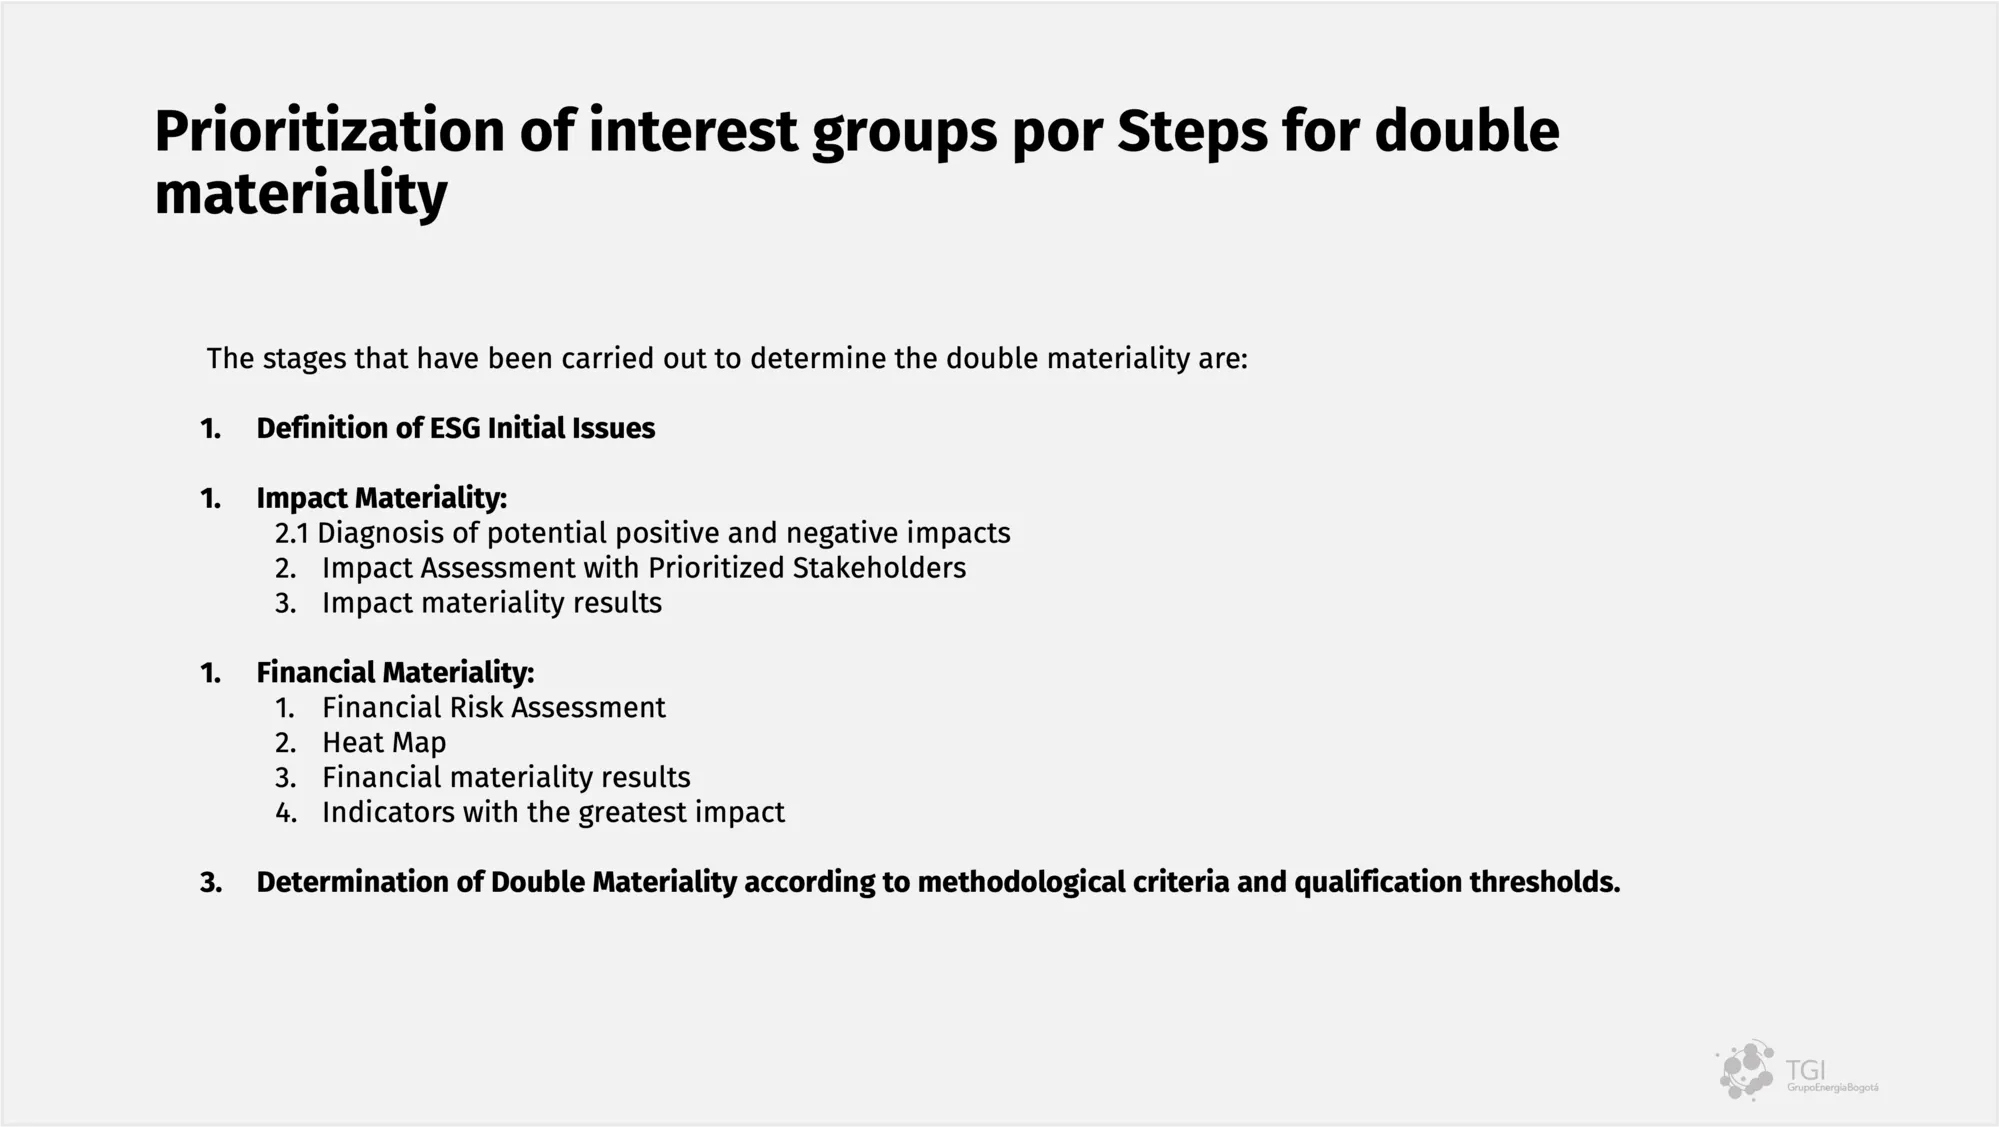 6 Prioritization of interest groups por Steps for double materiality.png